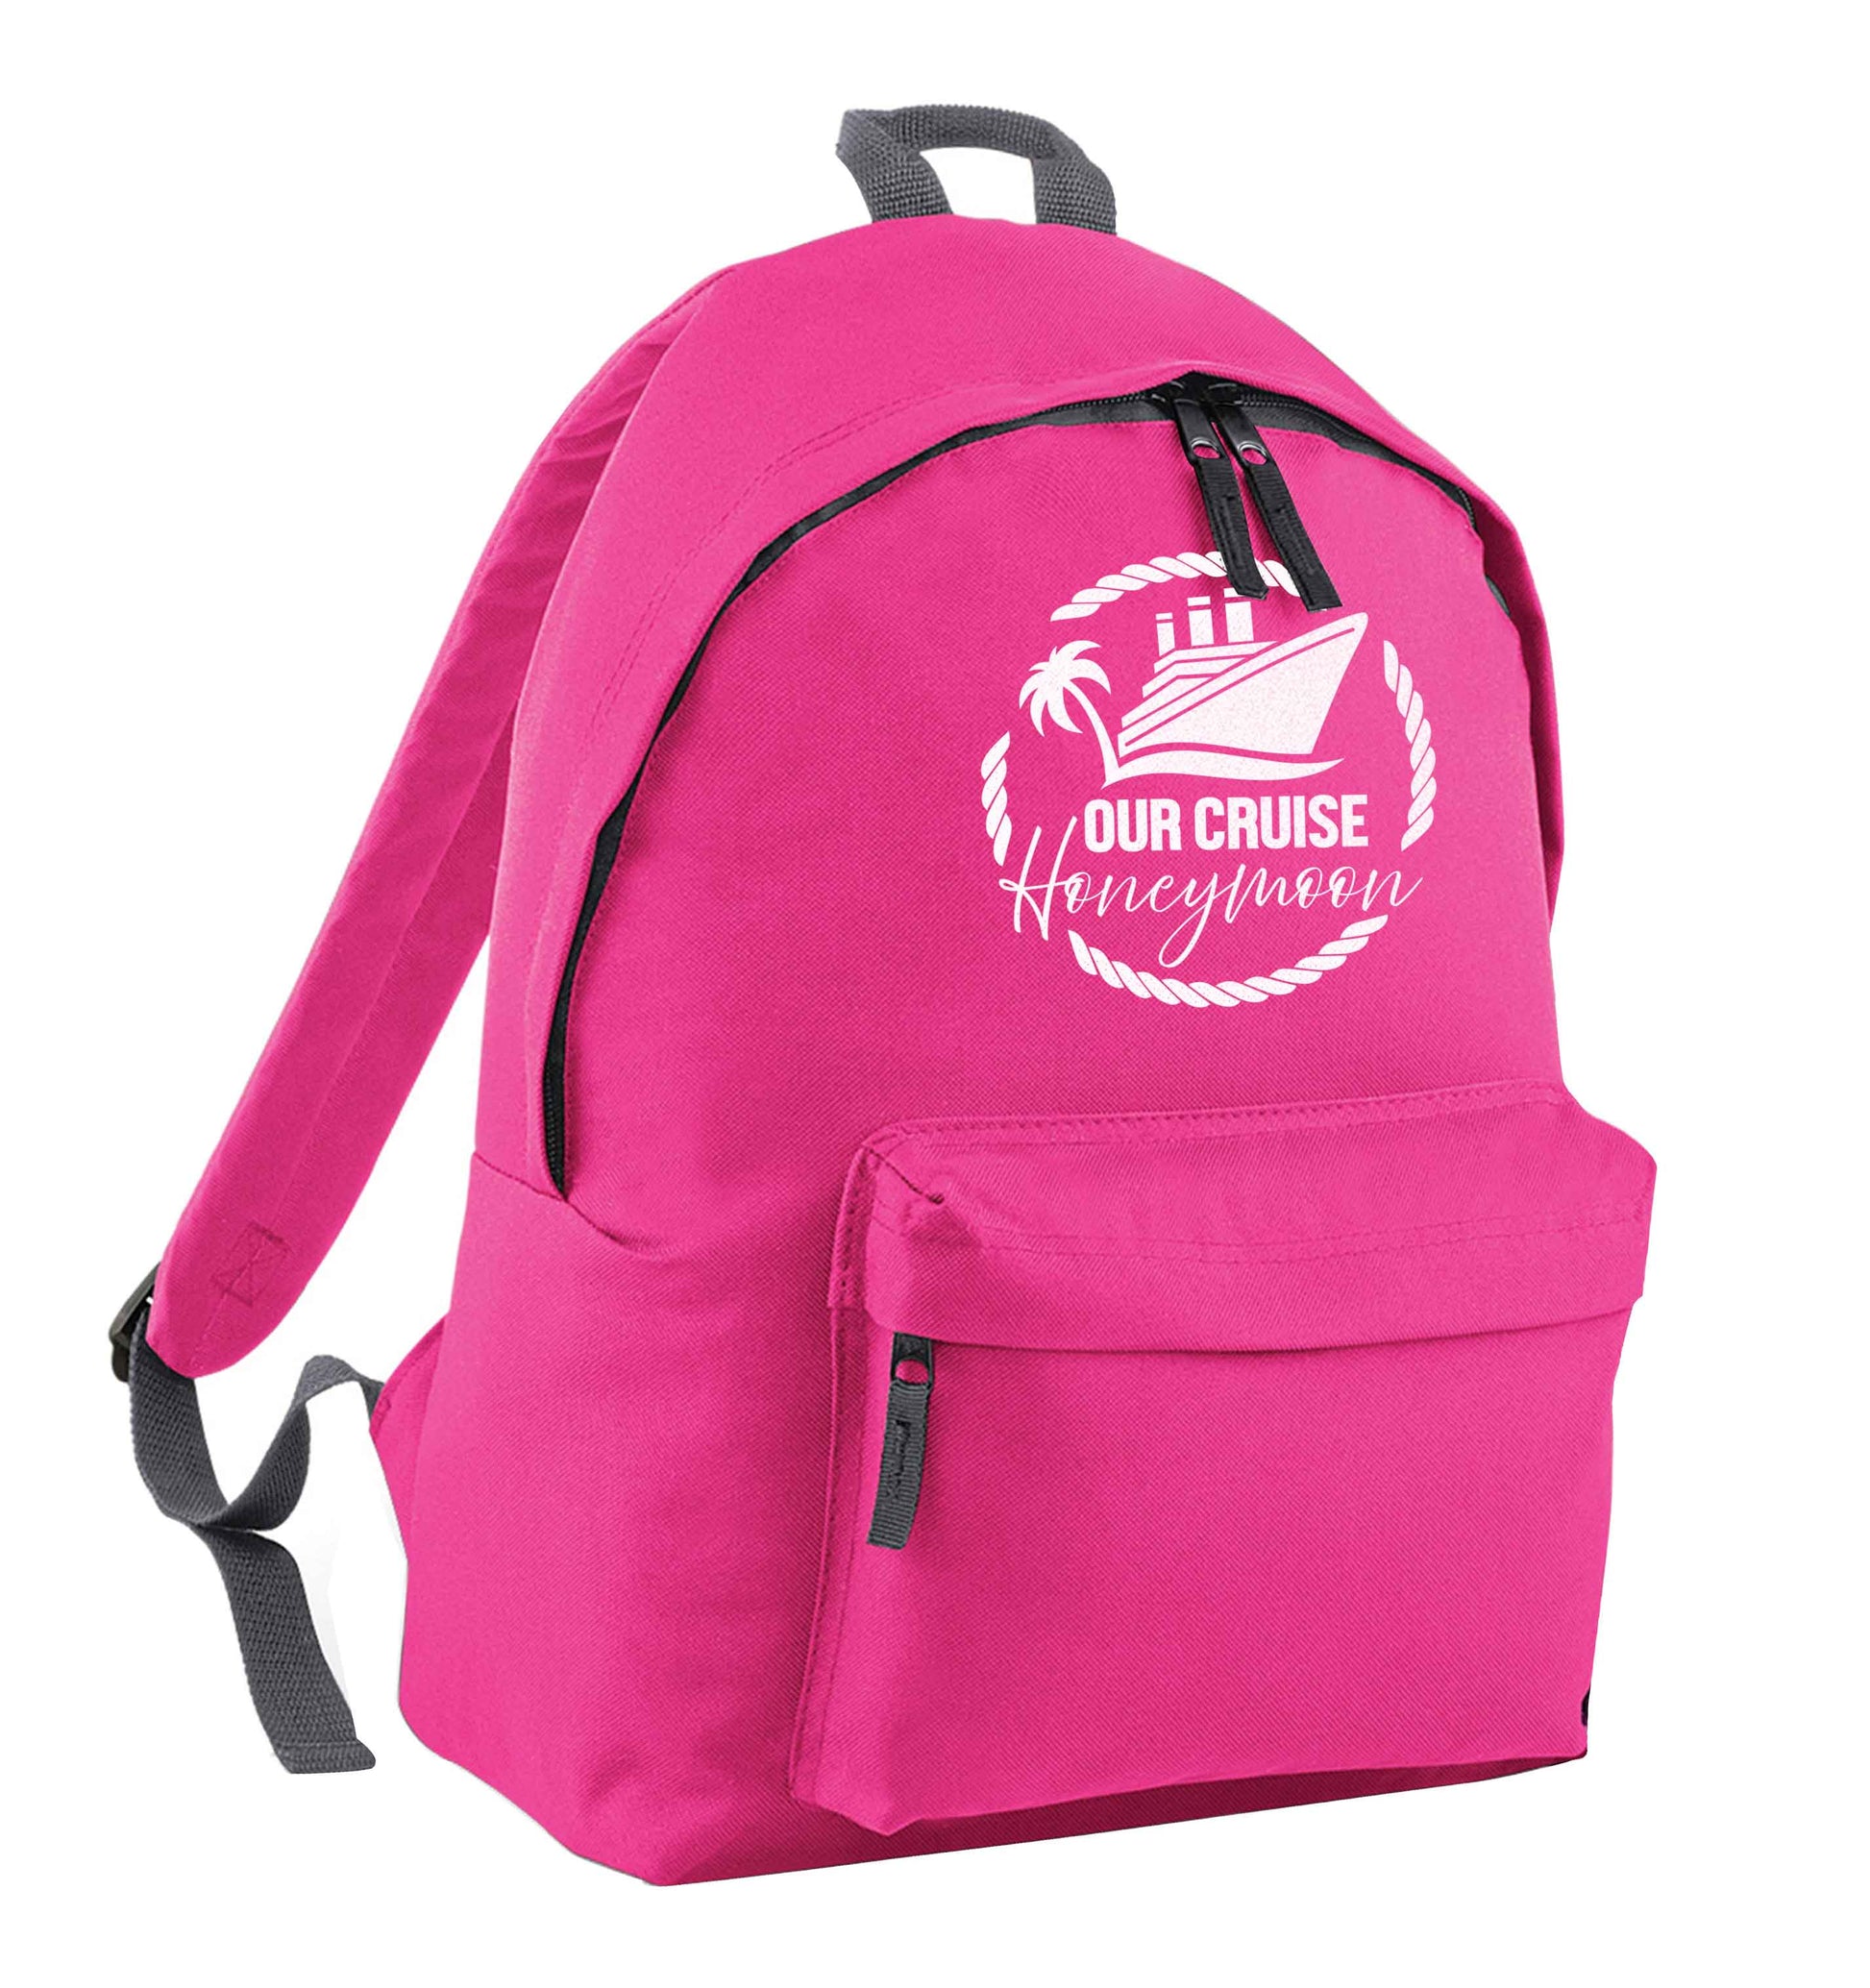 Our cruise honeymoon pink adults backpack